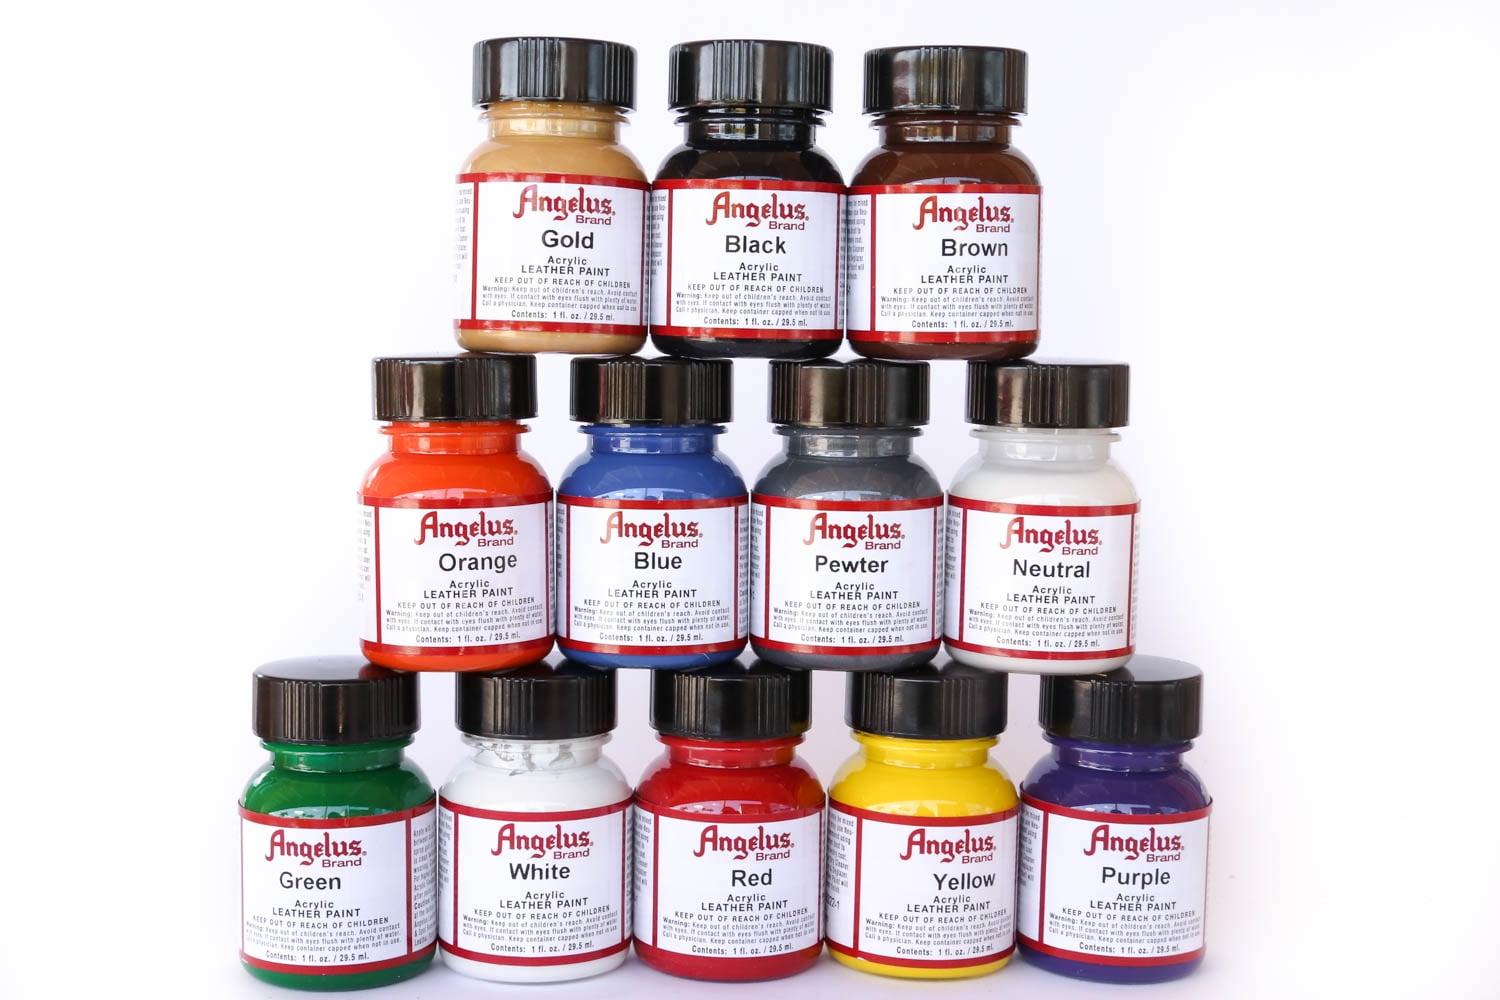 Angelus Acrylic Leather Paint Starter Kit - 12 colors in 1 oz